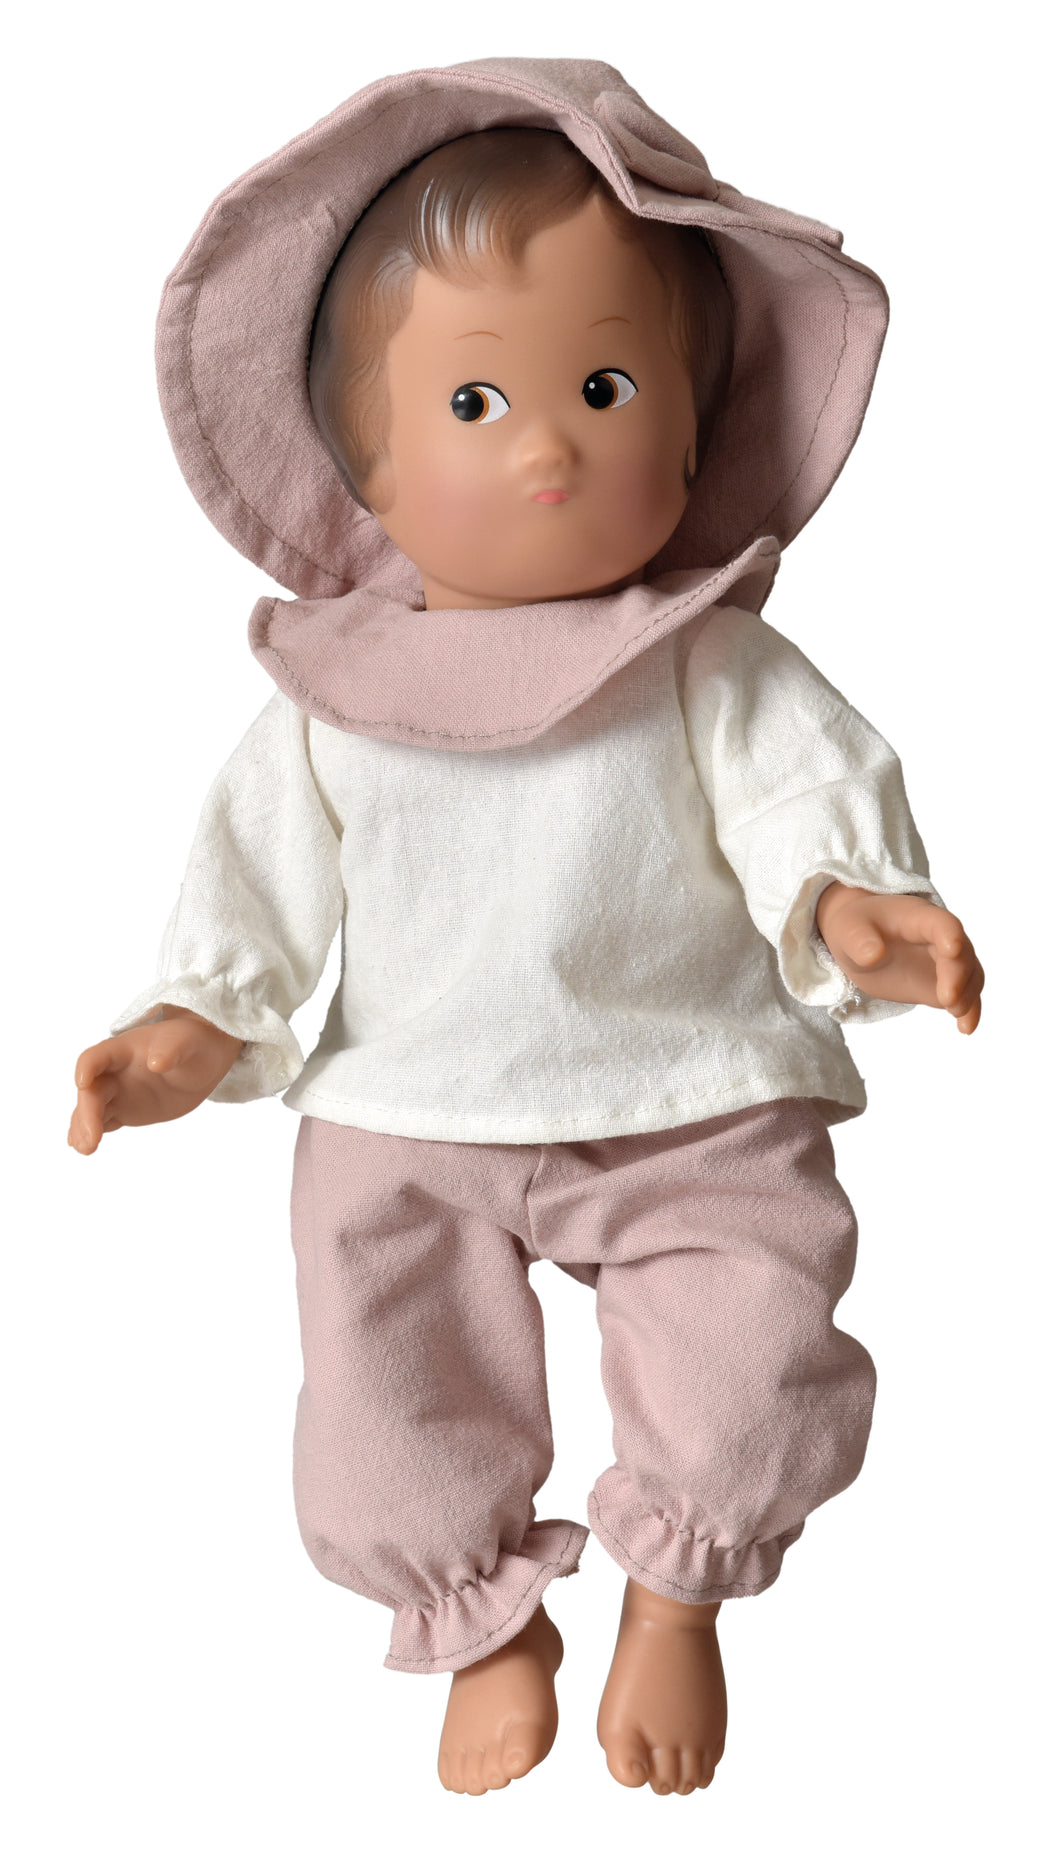 Les Petits by Egmont Toys Nora Doll